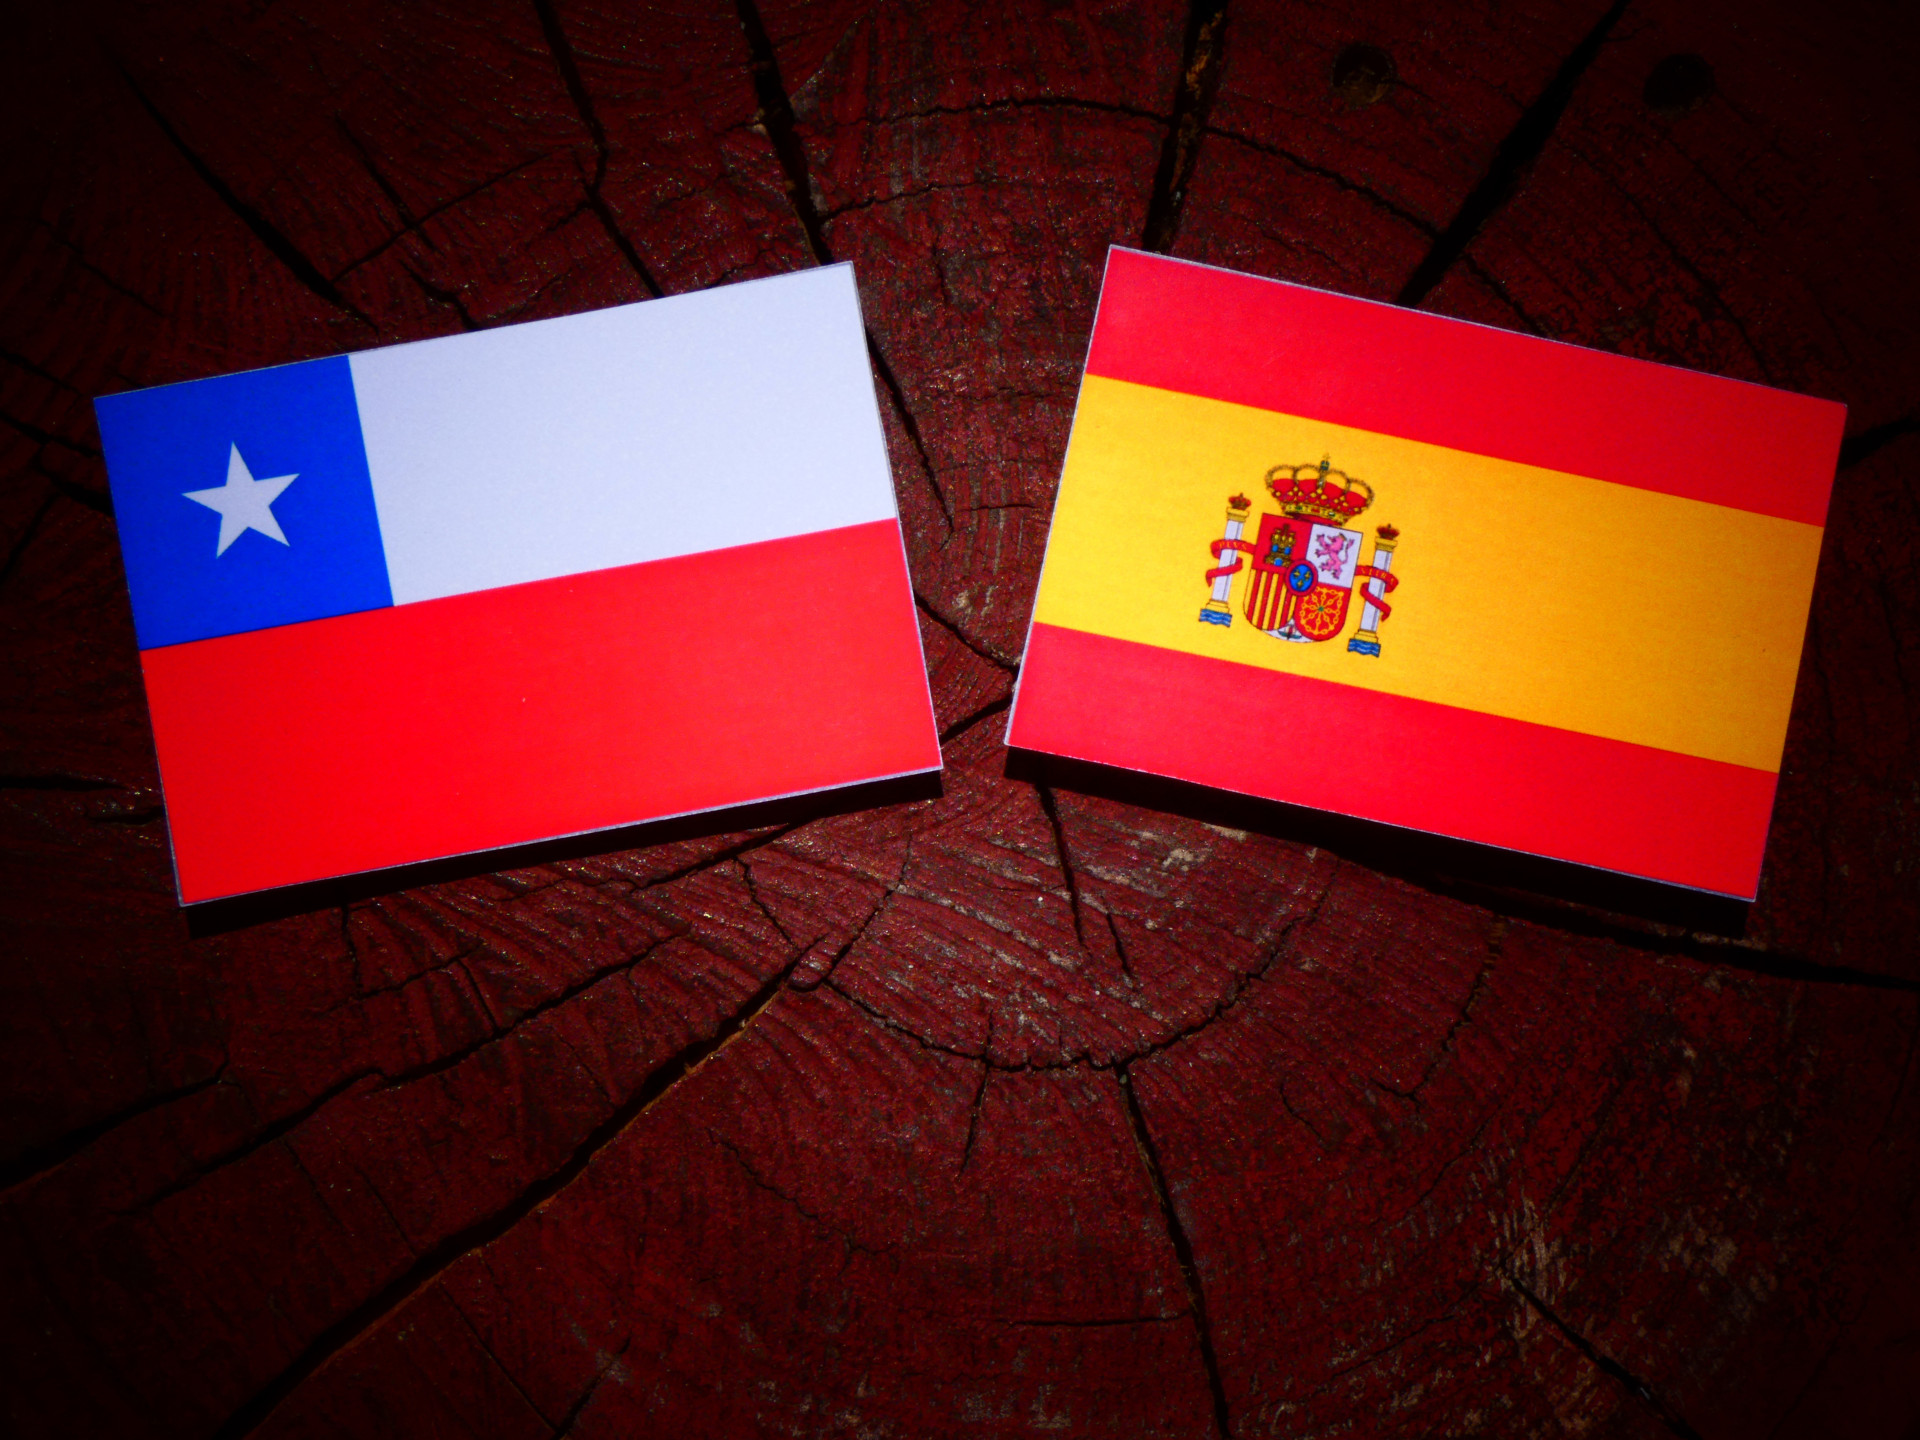 Chile and Spain also have two cities with very similar names, and both are worth a visit.<p>You may also like:<a href="https://www.starsinsider.com/n/447816?utm_source=msn.com&utm_medium=display&utm_campaign=referral_description&utm_content=210974v3en-ae"> Bizarre celebrity rumors we believed in the '90s</a></p>